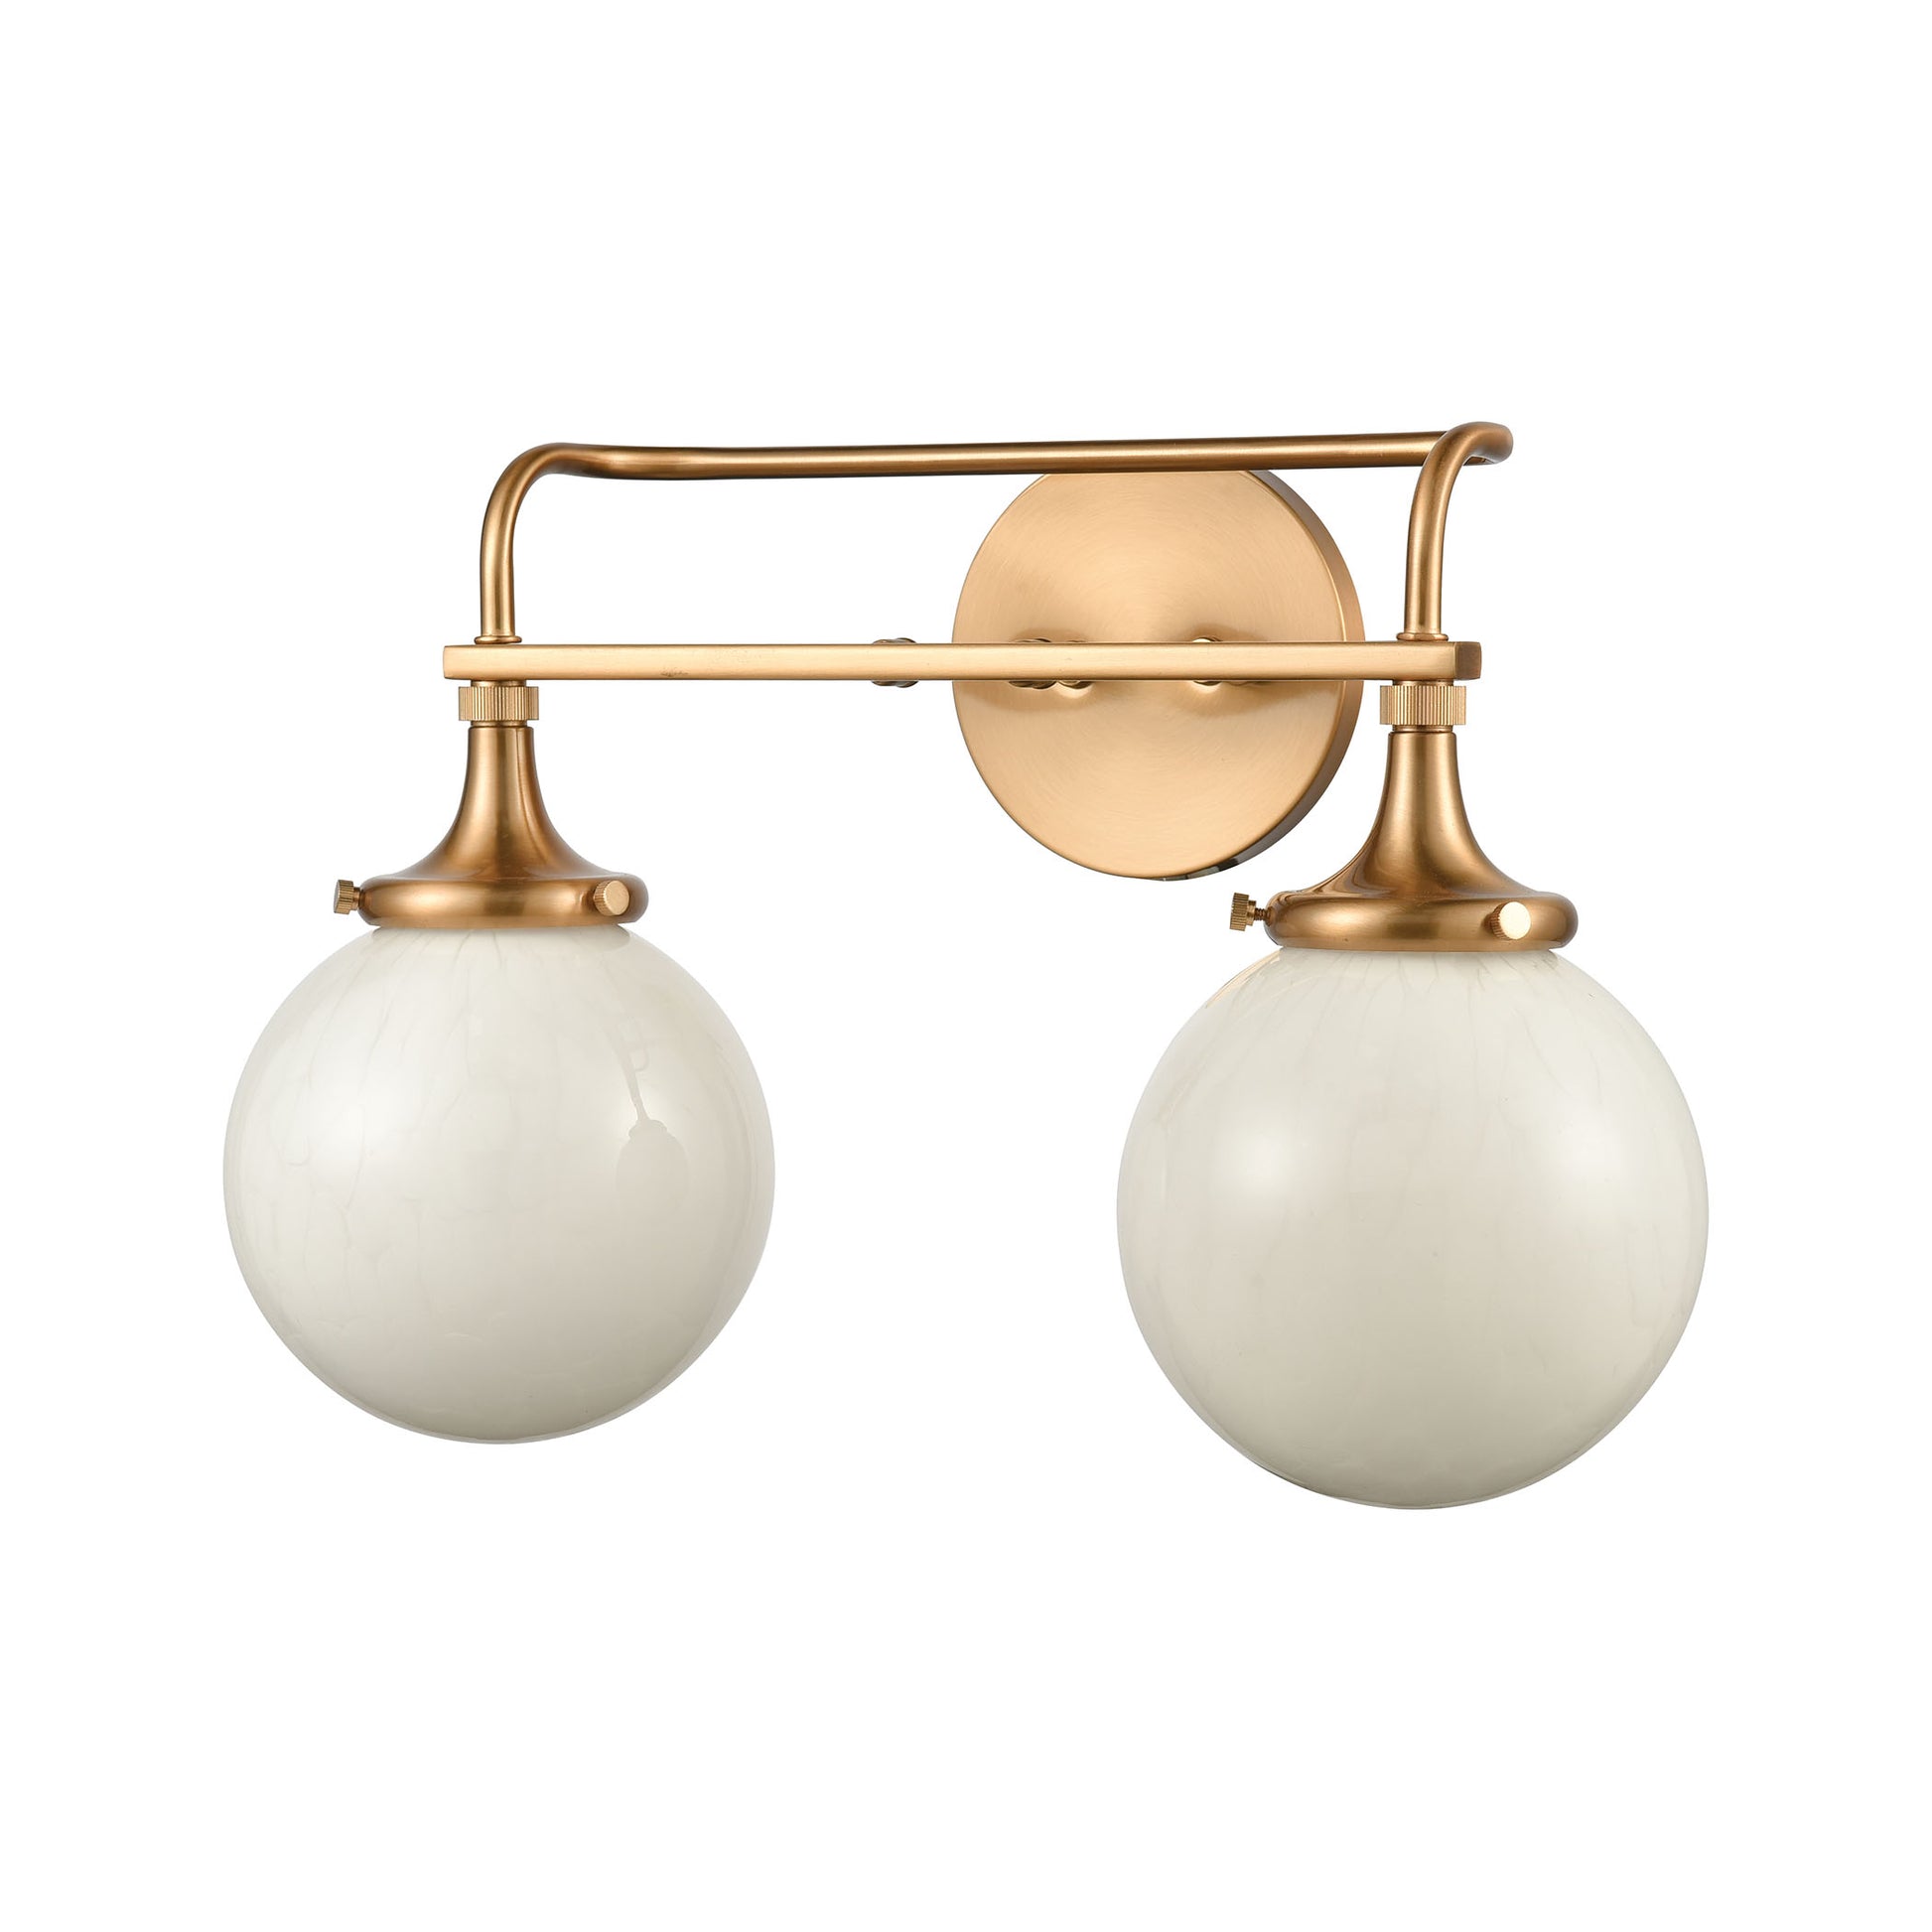 Beverly Hills Vanity Light in Satin Brass with White Feathered Glass by ELK Lighting-6